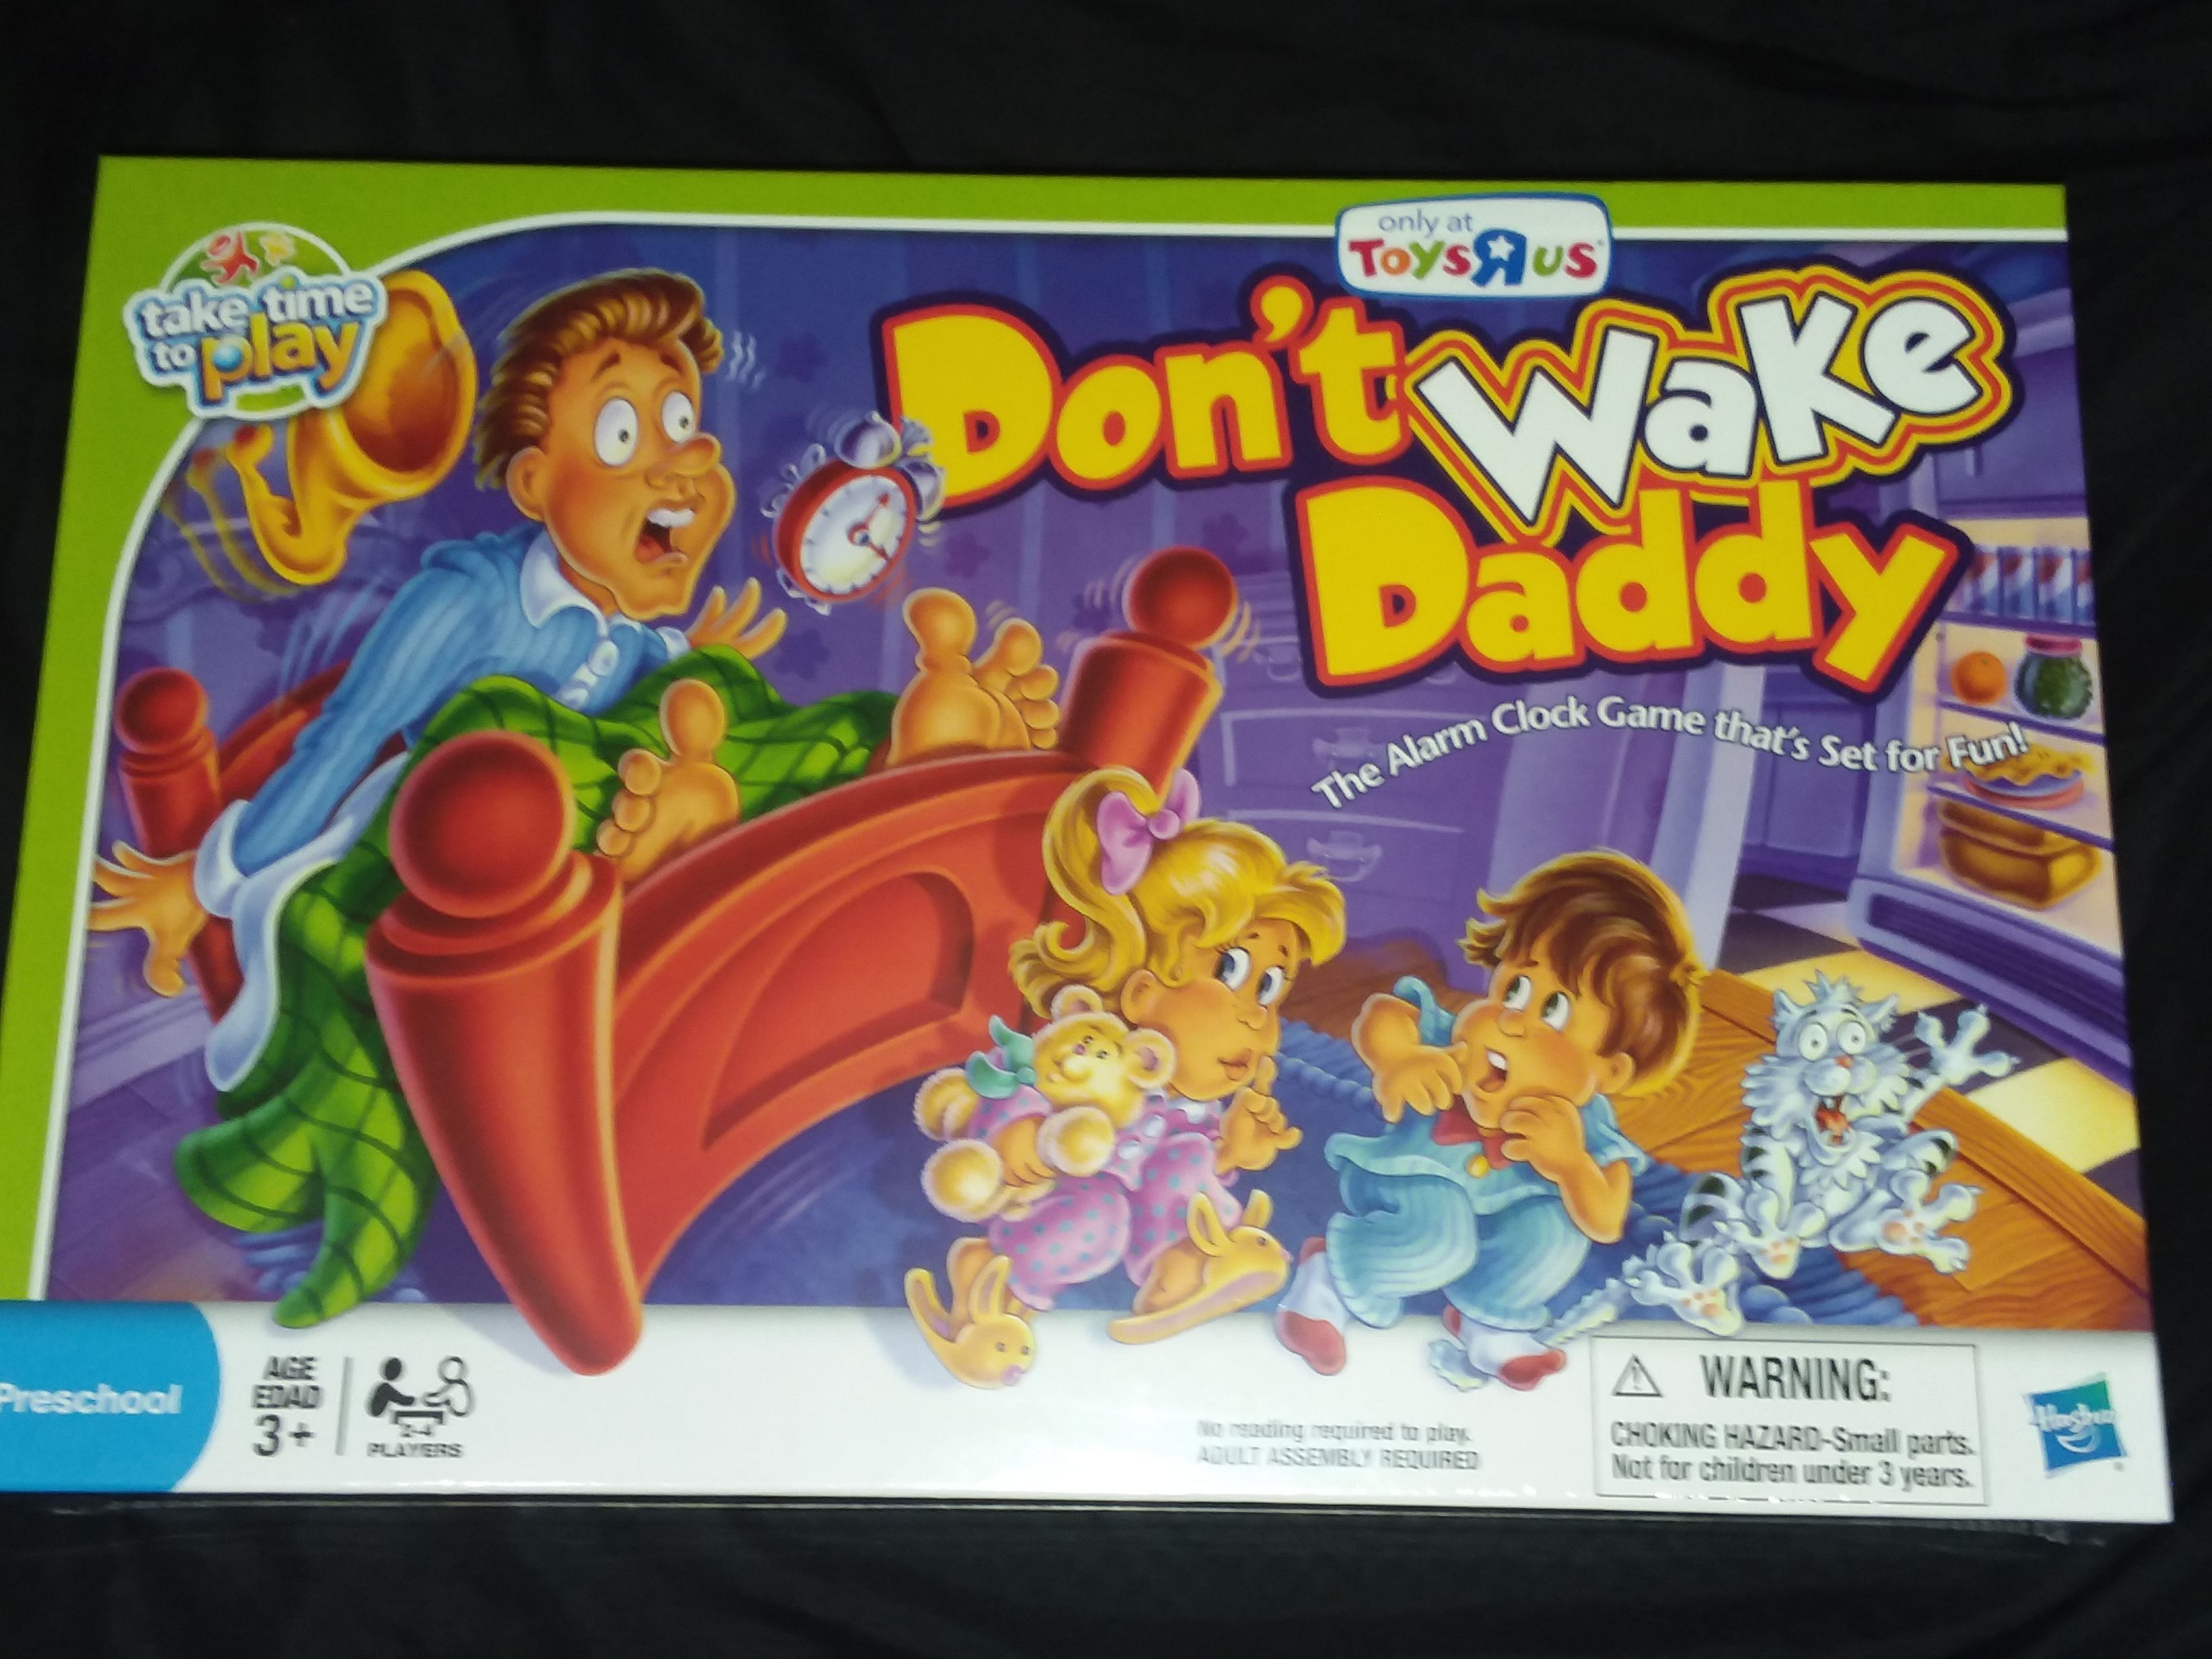 DON'T WAKE DADDY - ALARM CLOCK GAME HASBRO - TOYS R US - NEW / FACTORY SEALED.. EXTREMELY RARE. BEST PRICE EVERYWHERE. TOYS R US EXCLUSIVEr